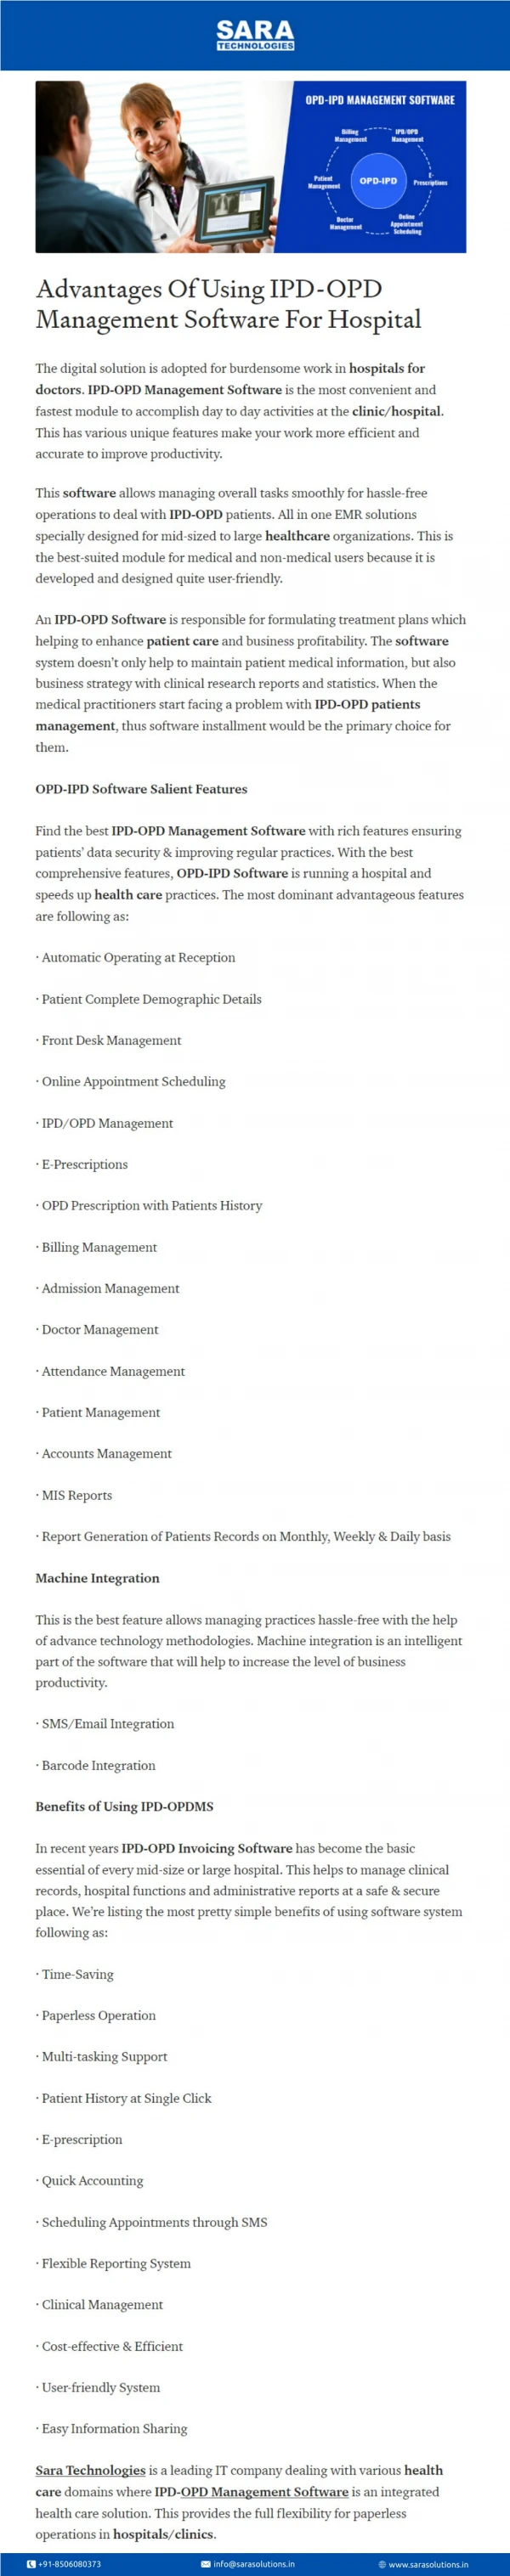 Advantages Of Using IPD-OPD Management Software For Hospital